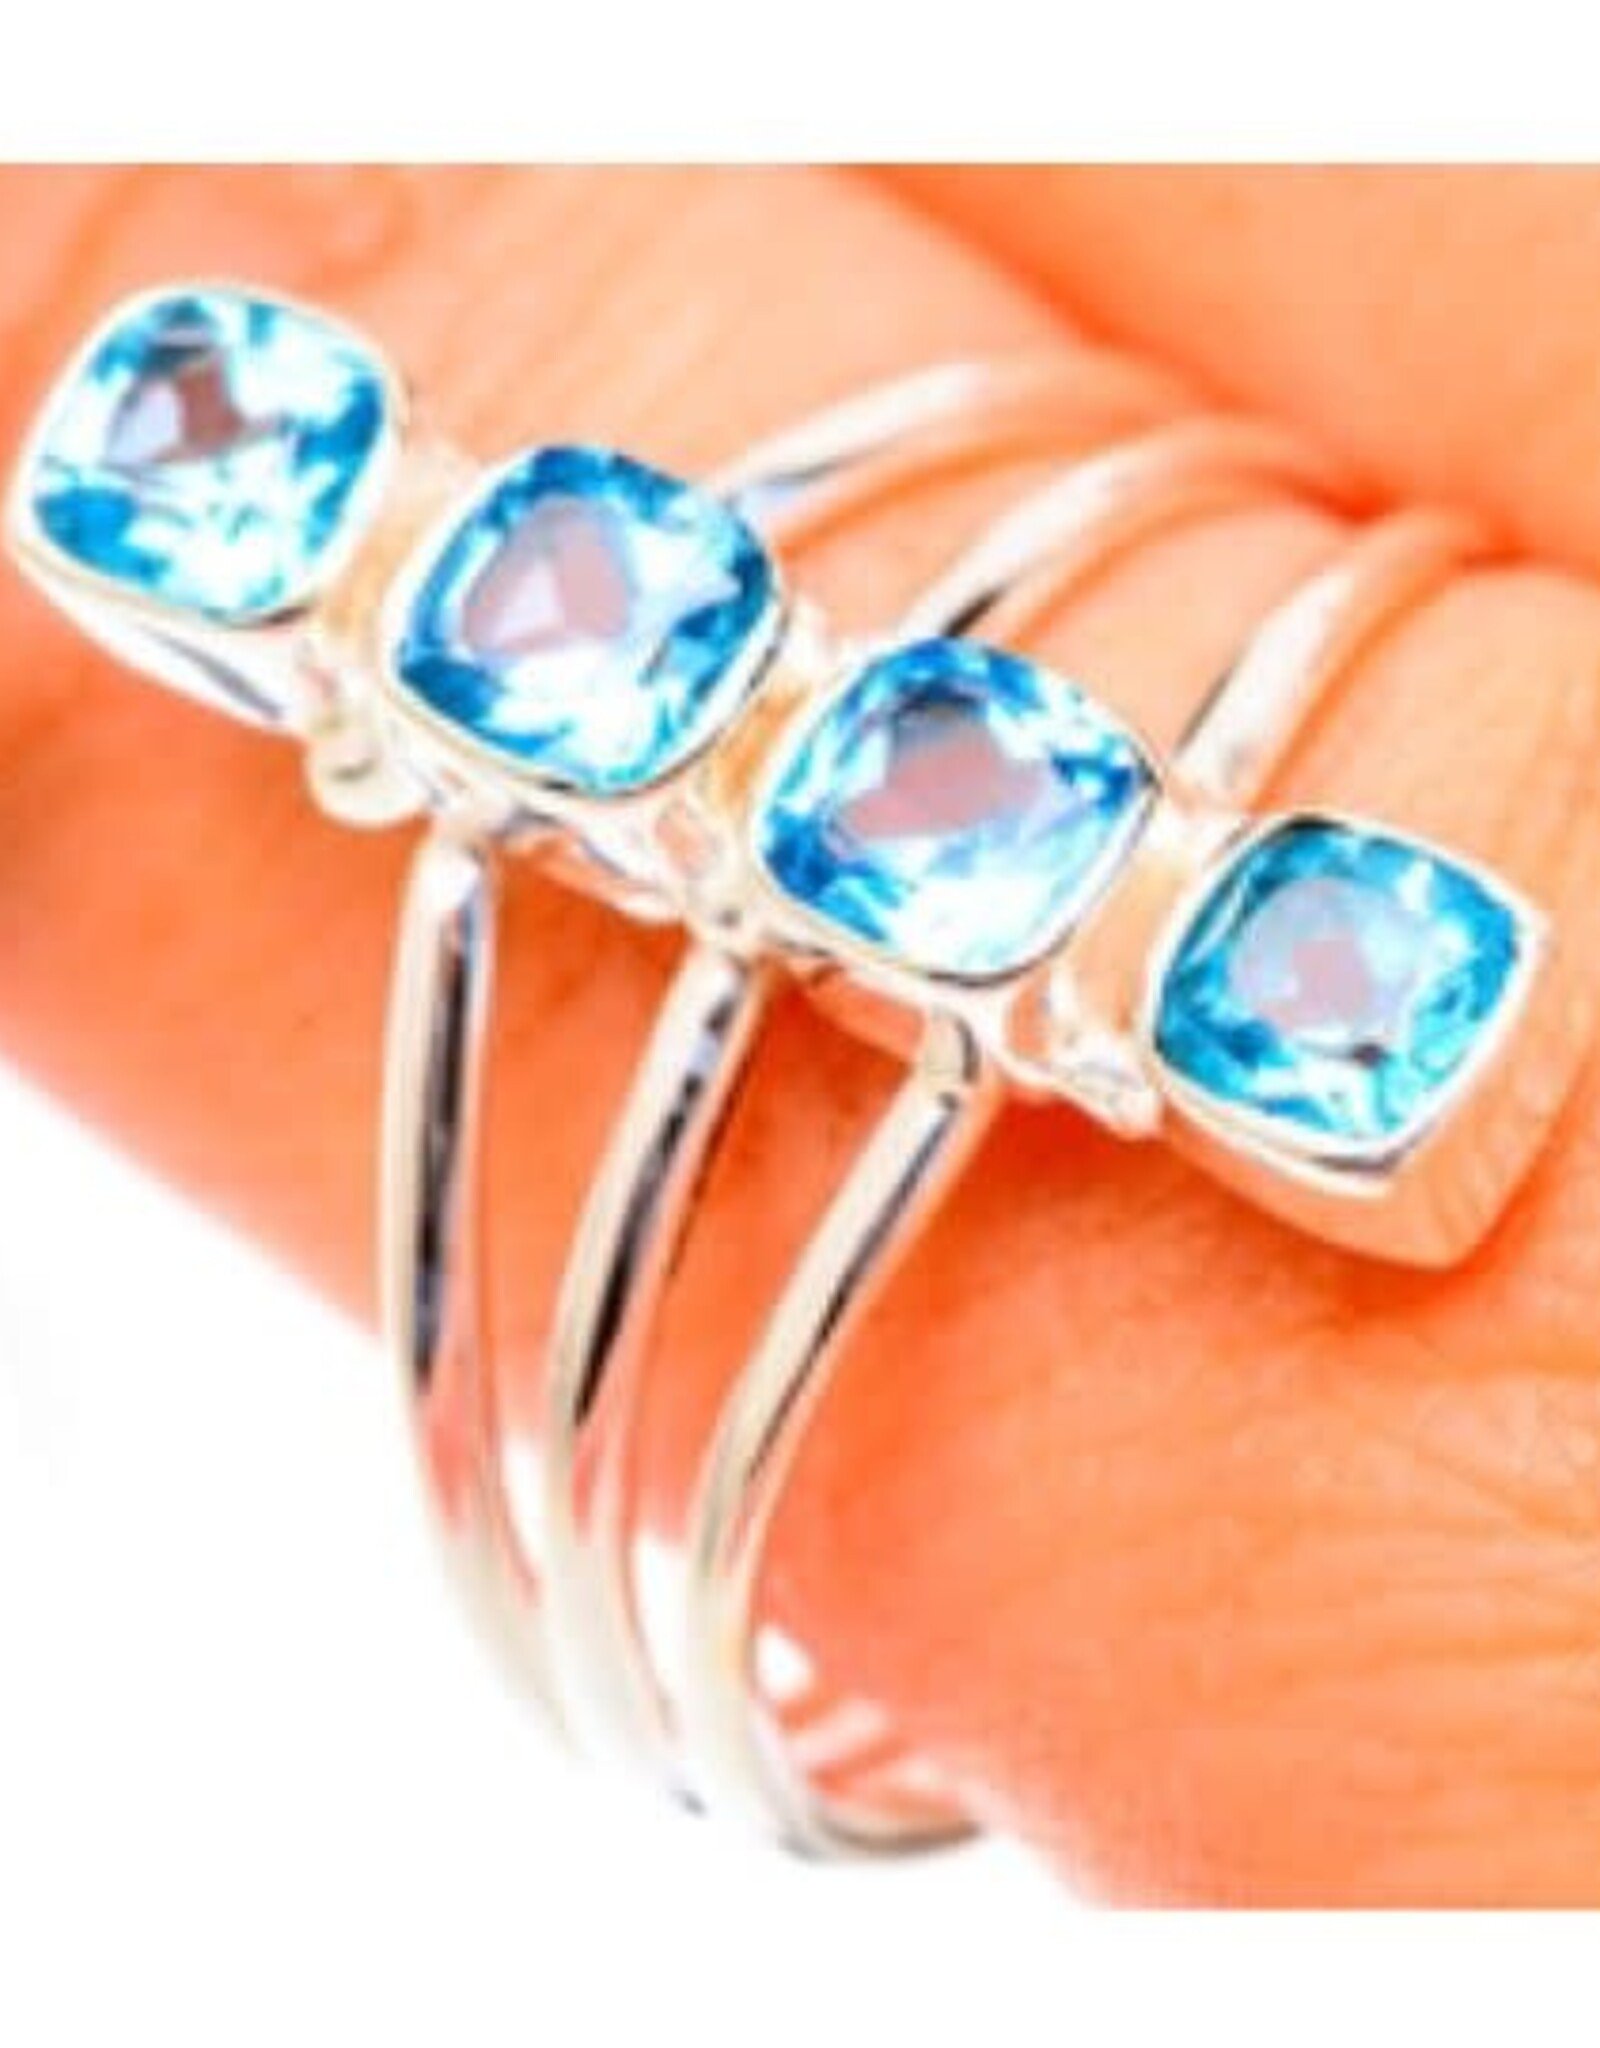 Blue Topaz Ring Sterling Silver Size 11.25